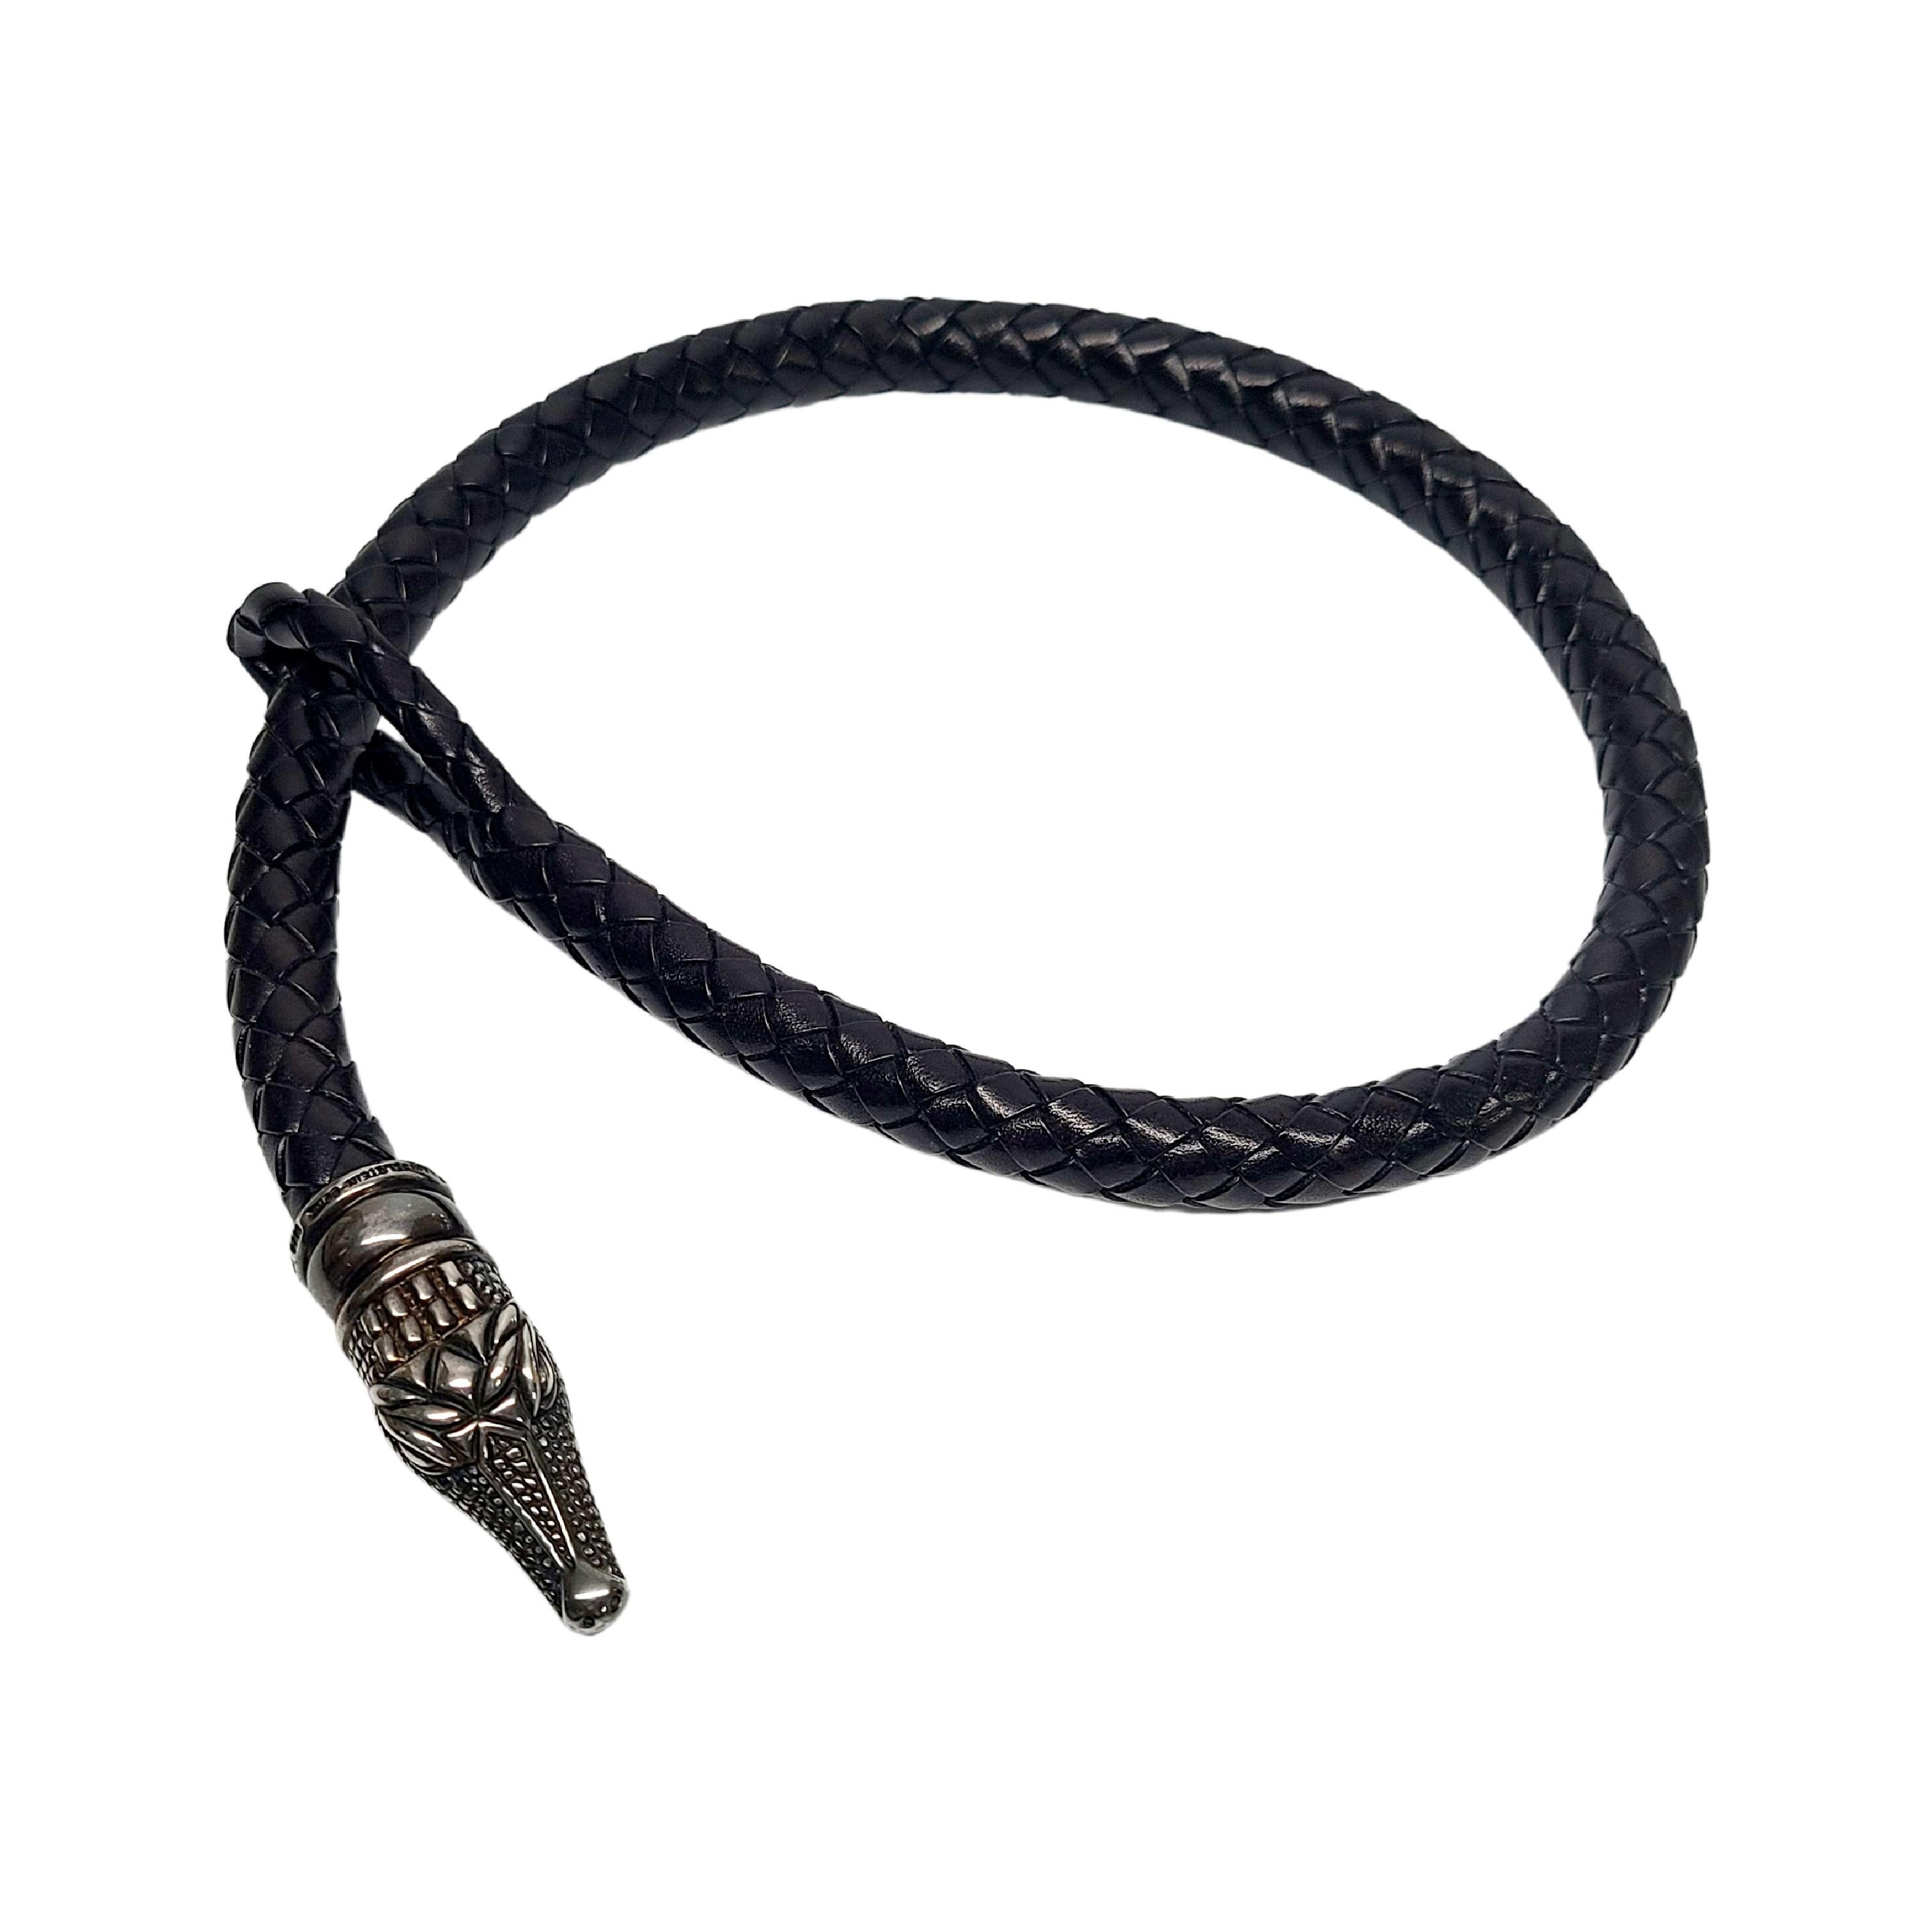 Sterling silver alligator head on a braided leather choker necklace by KIESELSTEIN-CORD with original pouch.

Beautifully detailed alligator head on a round braided/woven leather cord with a loop at the end. By high-end Manhattan designer